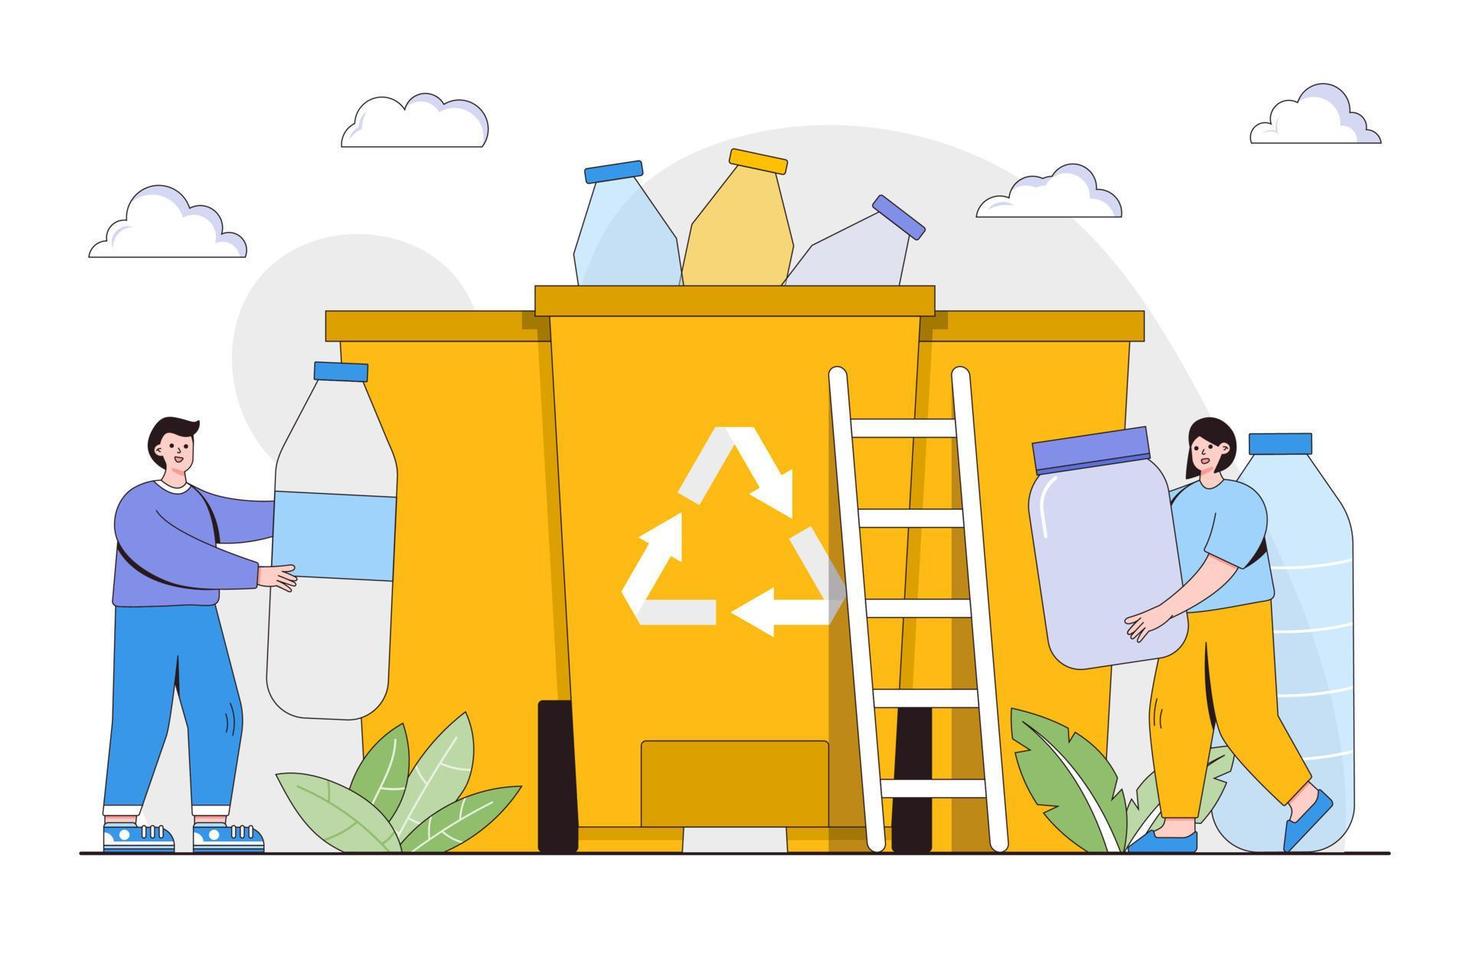 Plastic pollution problem concept. People collecting and sorting plastic trash into recycling garbage bin. Outline design style minimal vector illustration for landing page